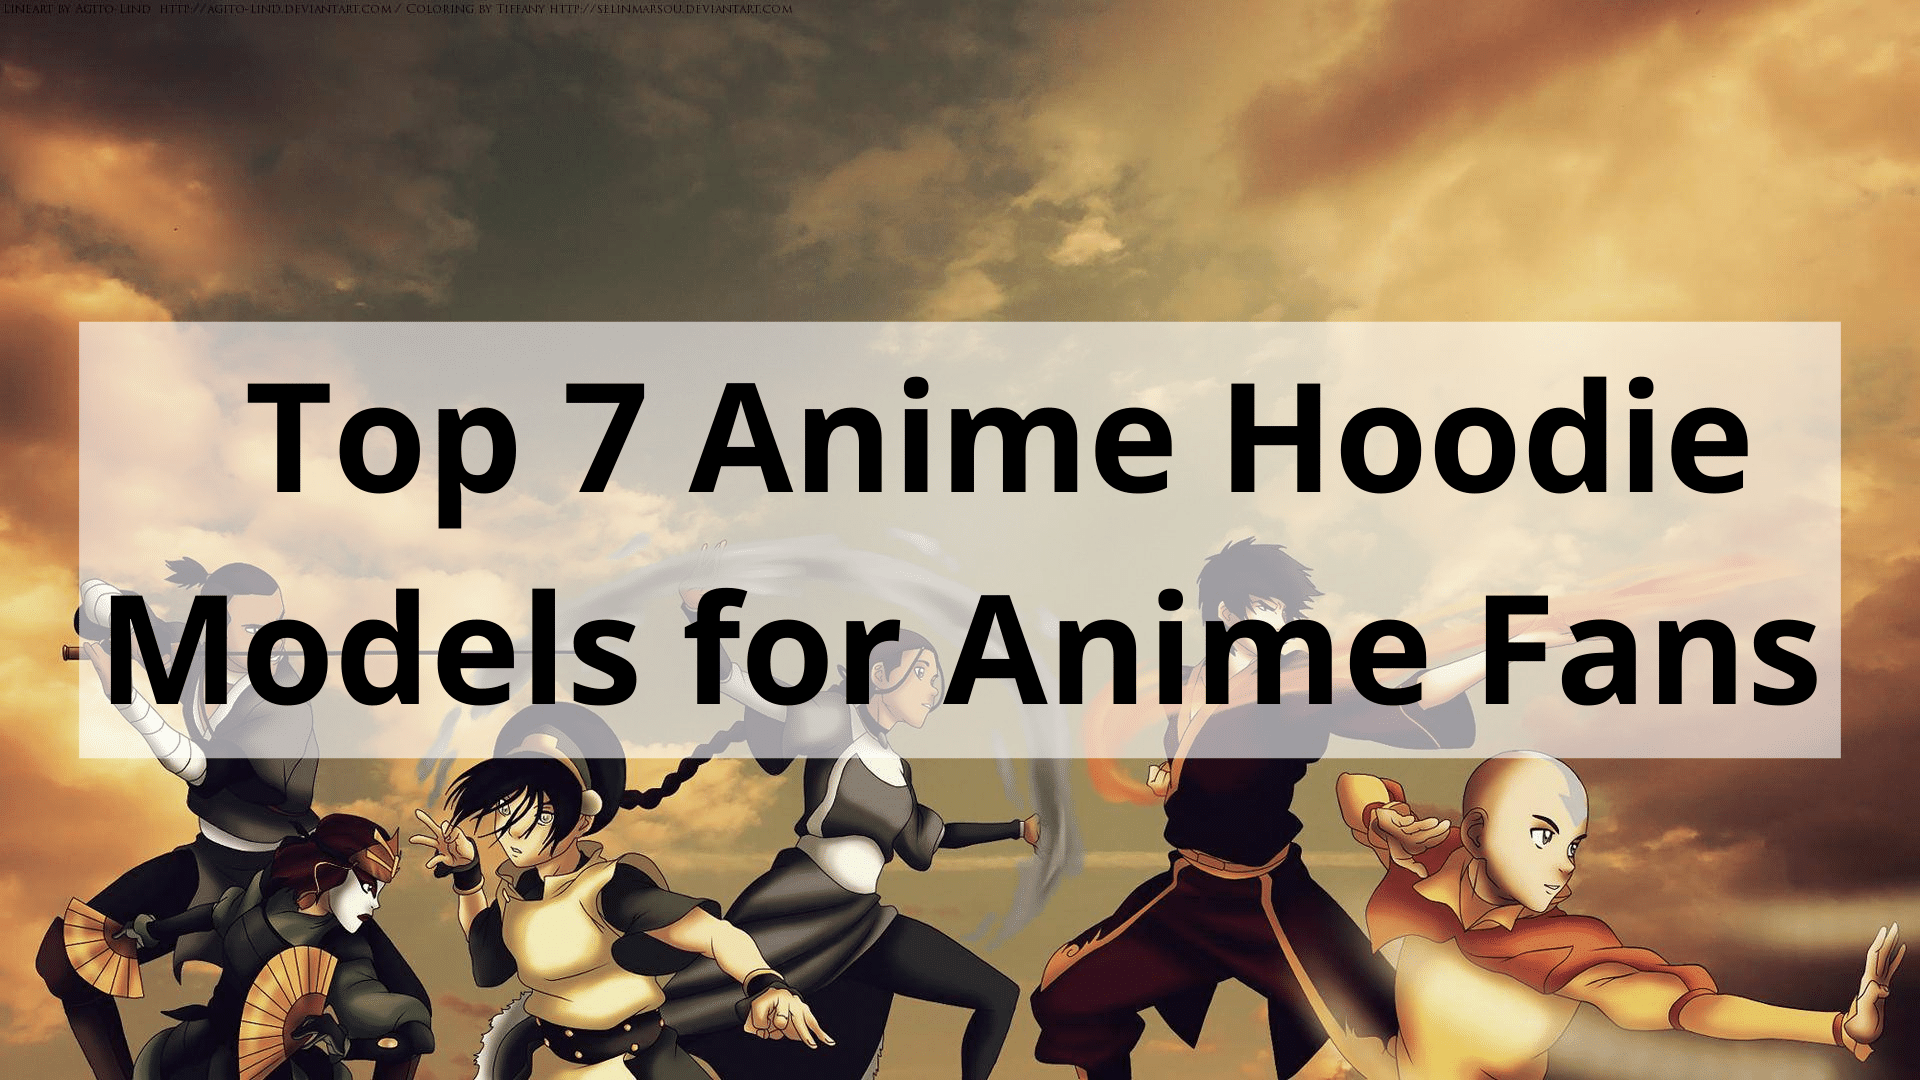 Top 7 Anime Hoodie Models for Anime Fans